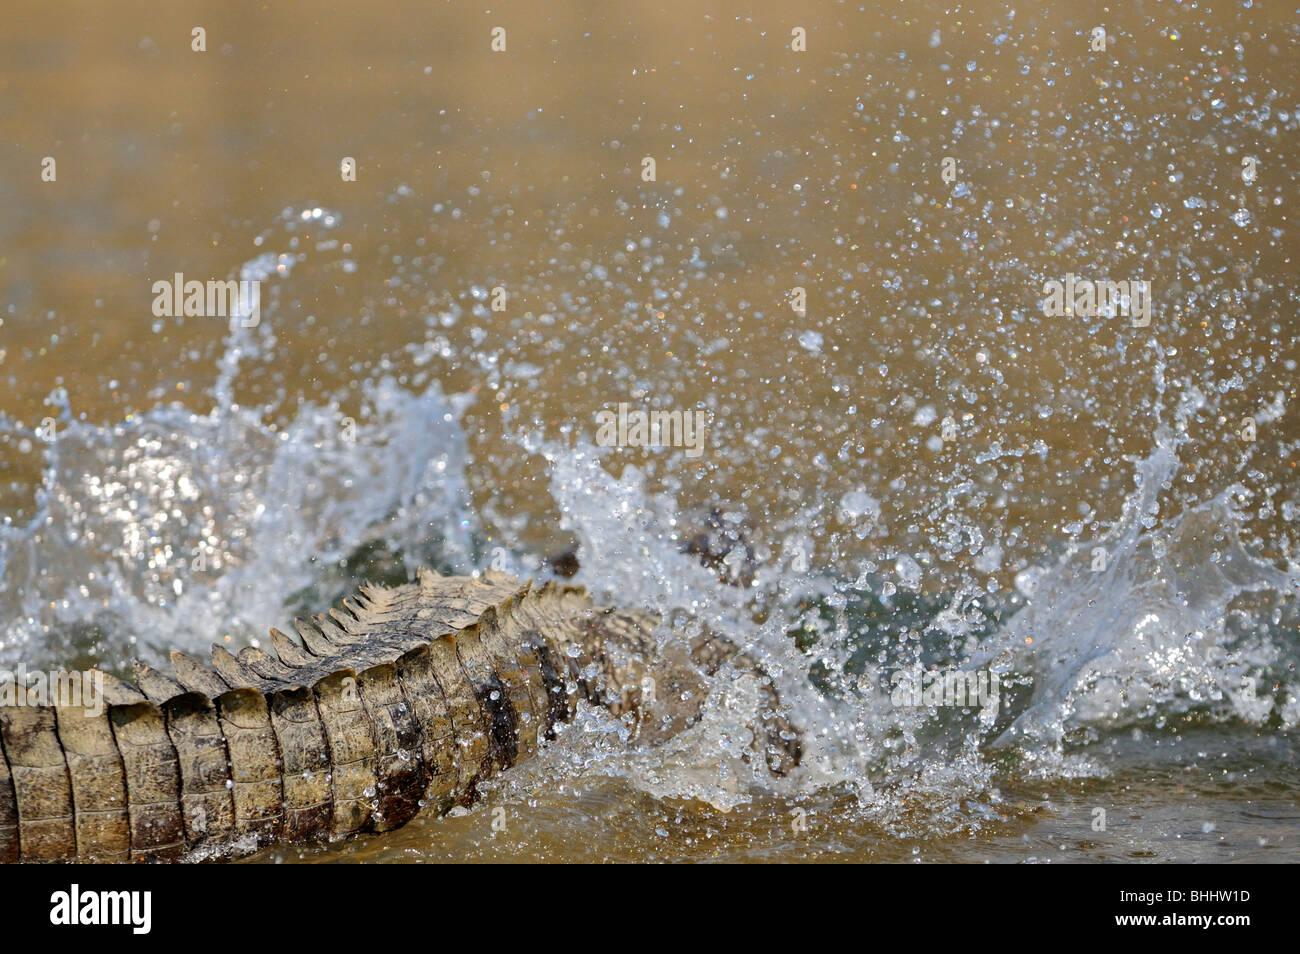 Indian Marsh crocodile's tail splashing water in a river in India Stock Photo